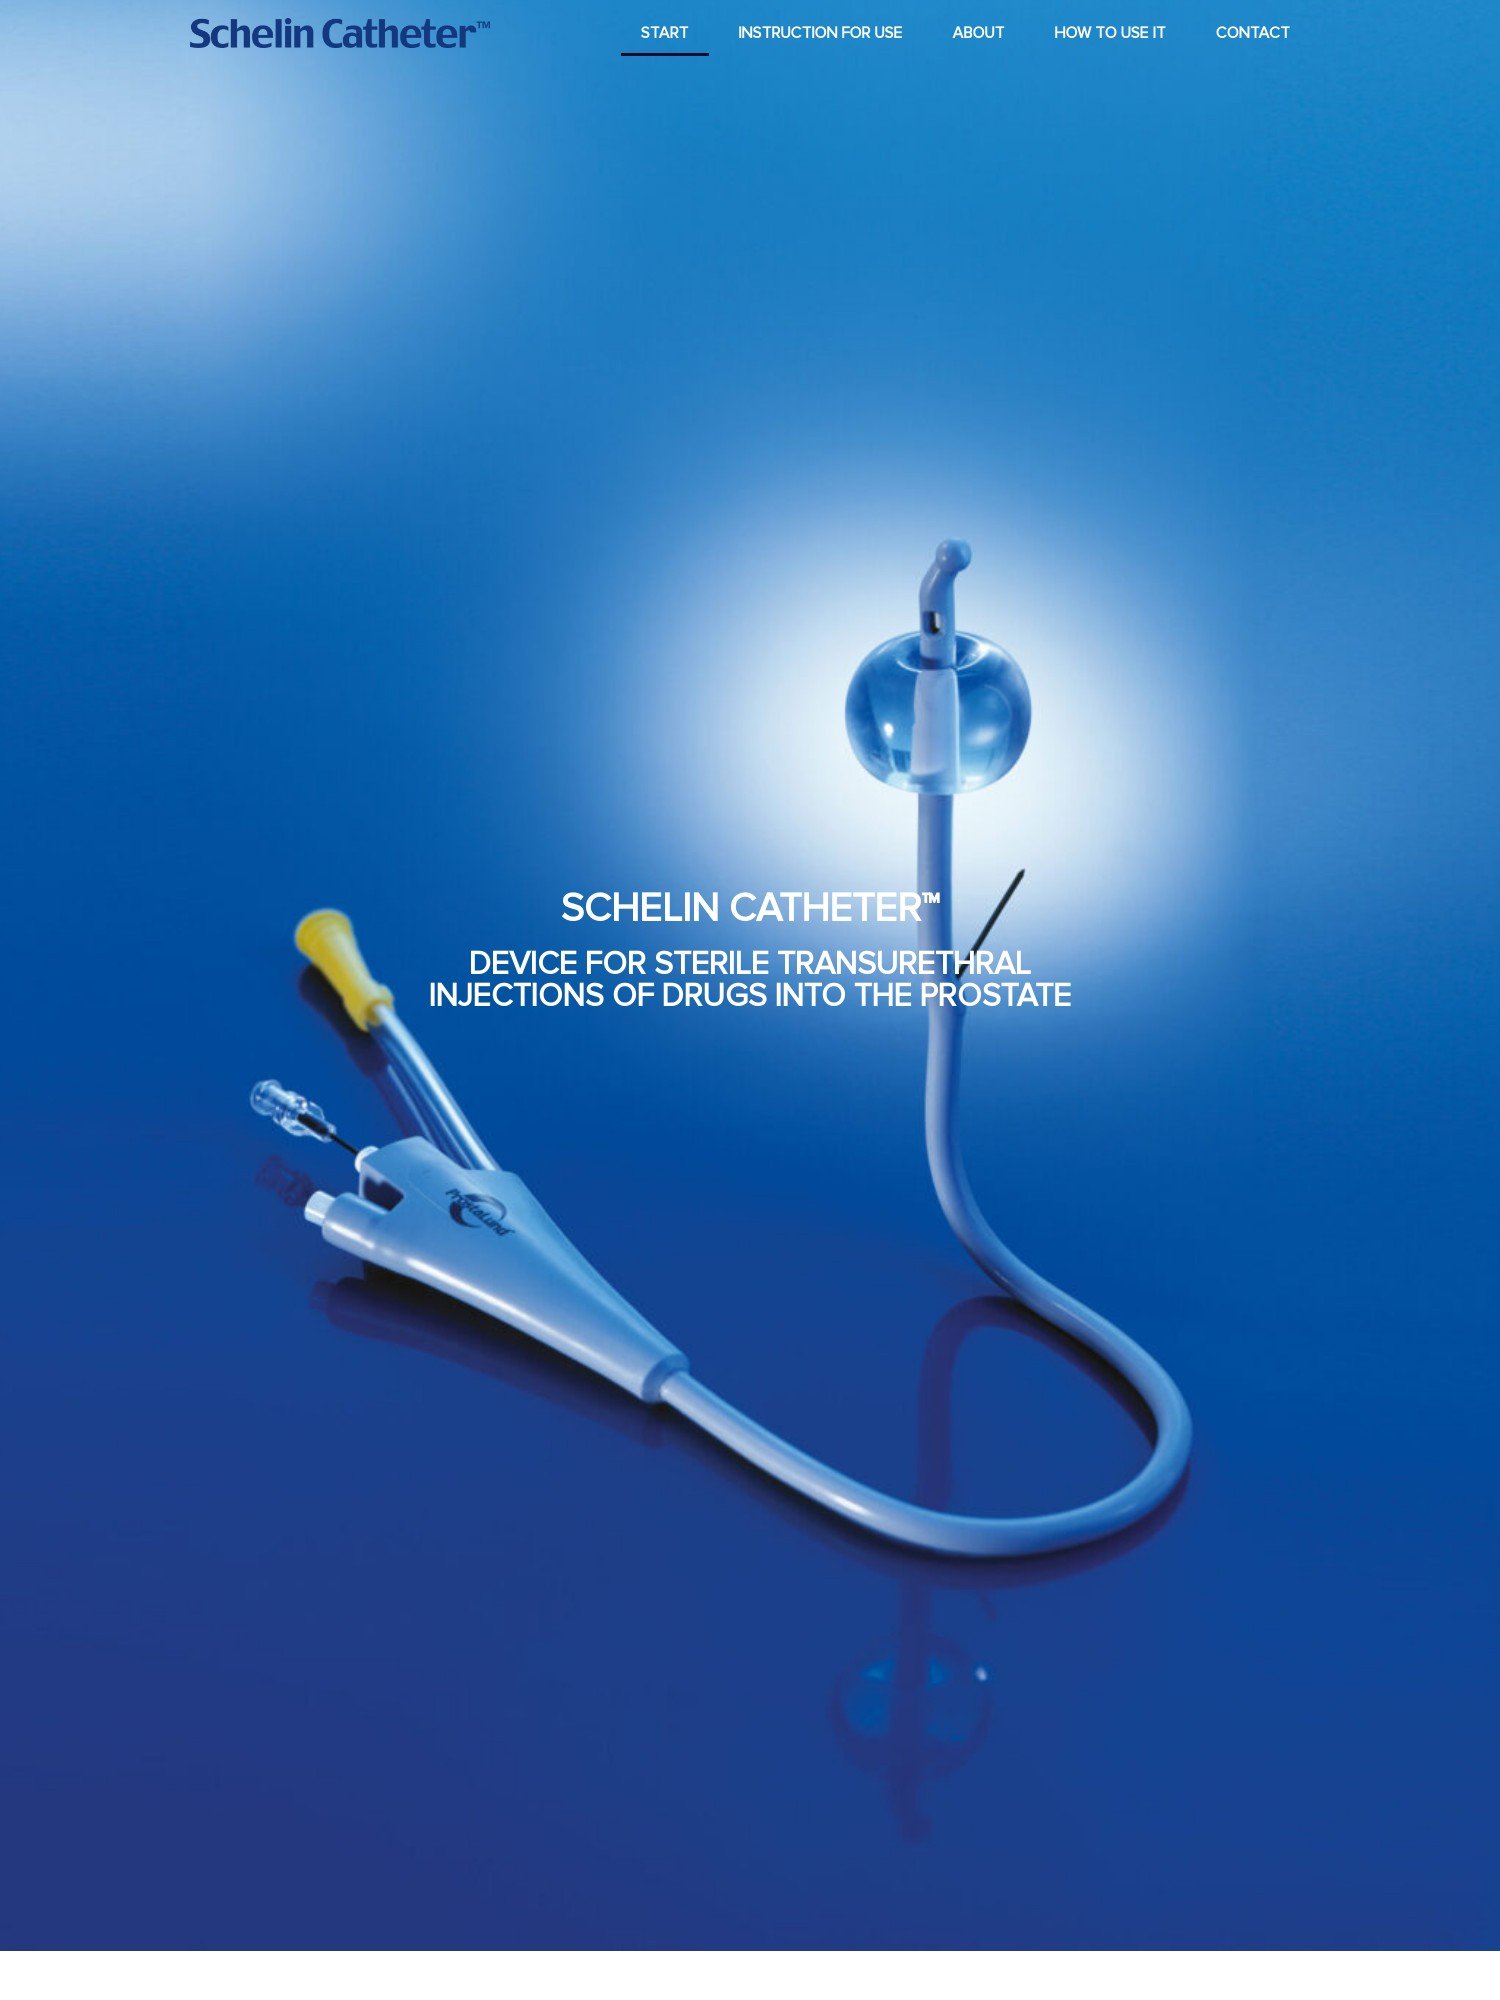 SCHELIN CATHETER™ – DEVICE FOR STERILE TRANSURETHRAL INJECTIONS OF DRUGS INTO THE PROSTATE